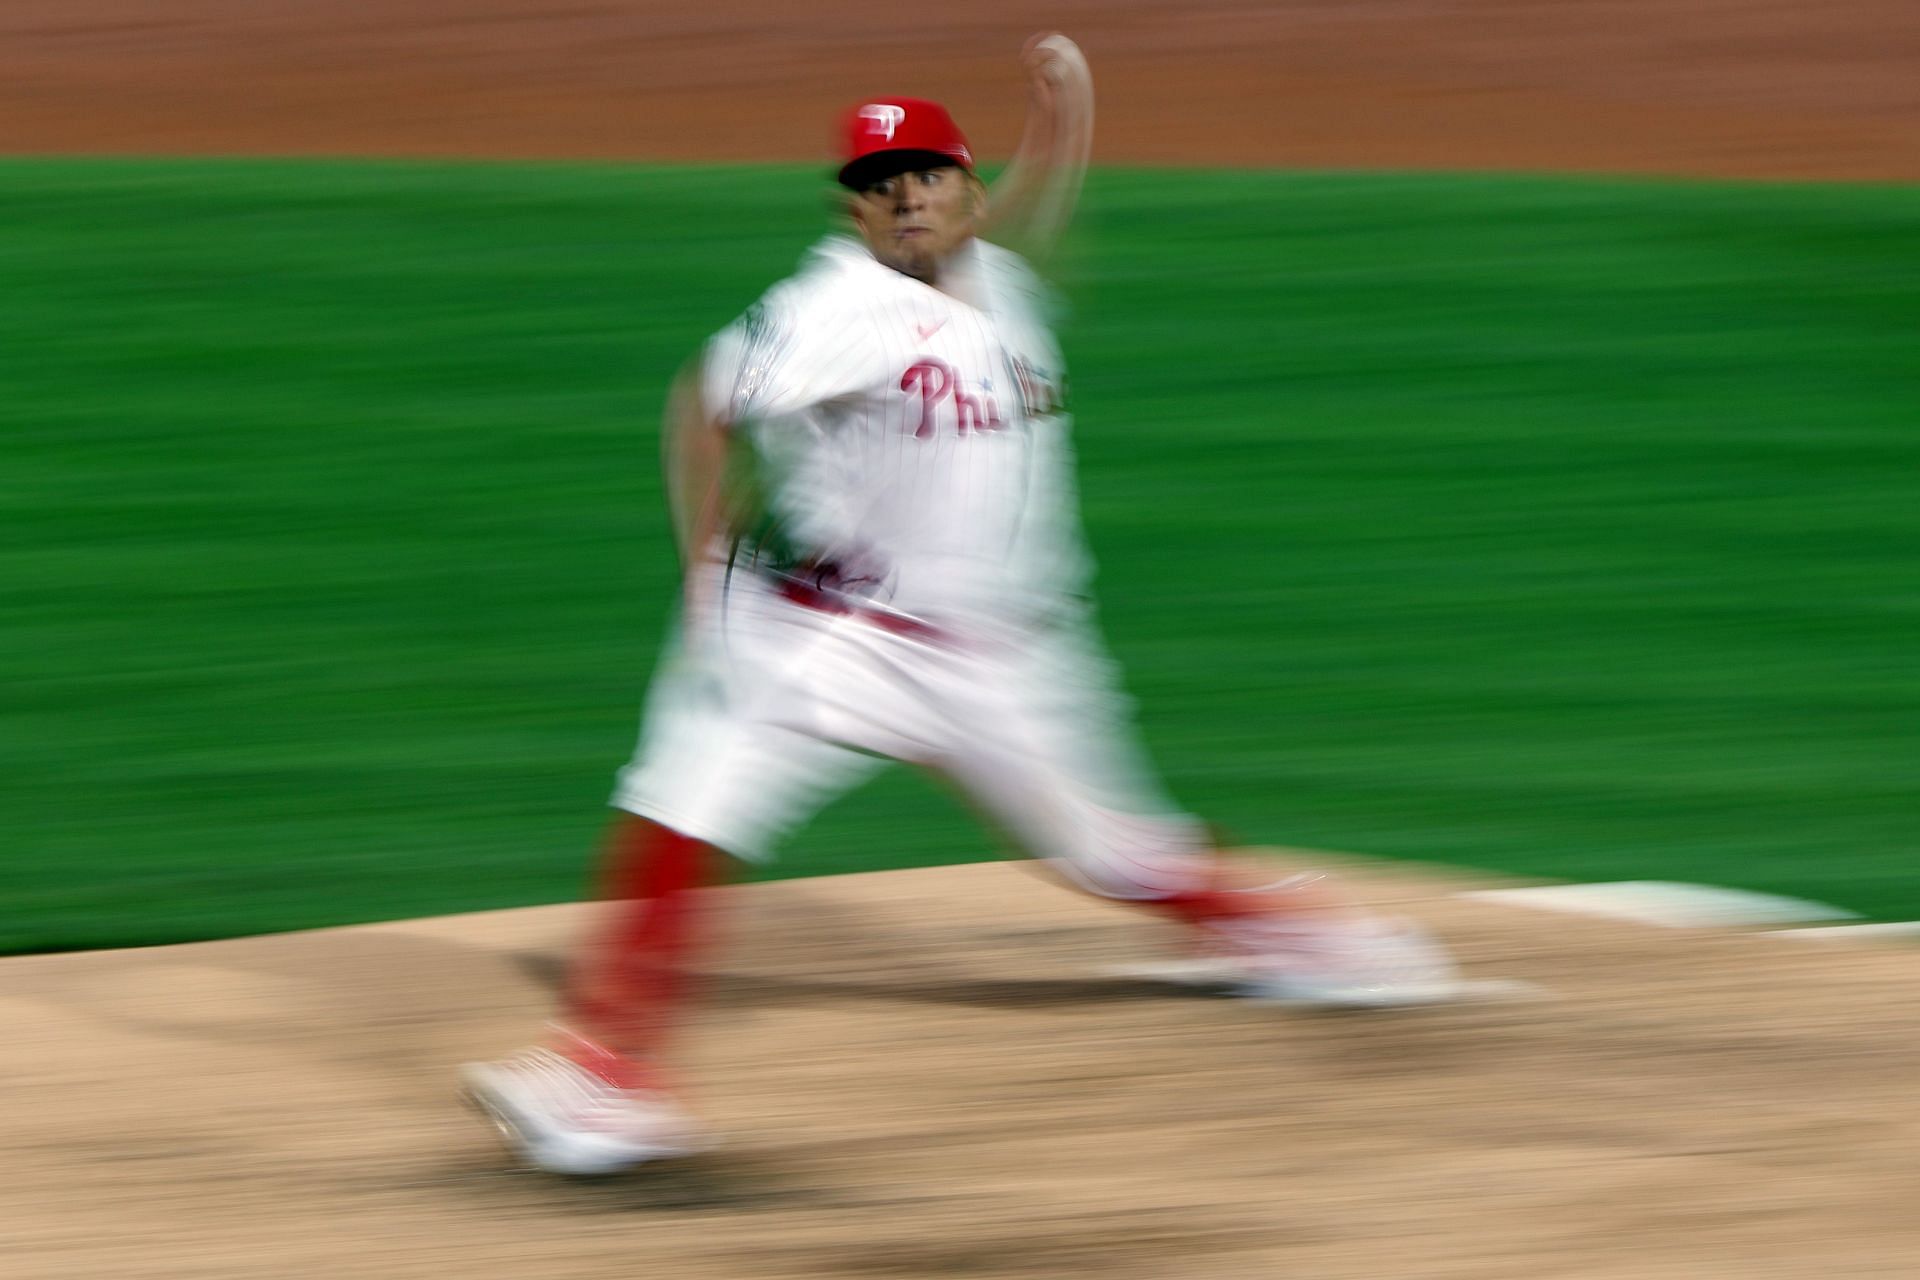 Phillies&rsquo; pitcher, Ranger Suarez suffered an injury and did not pitch any spring training games